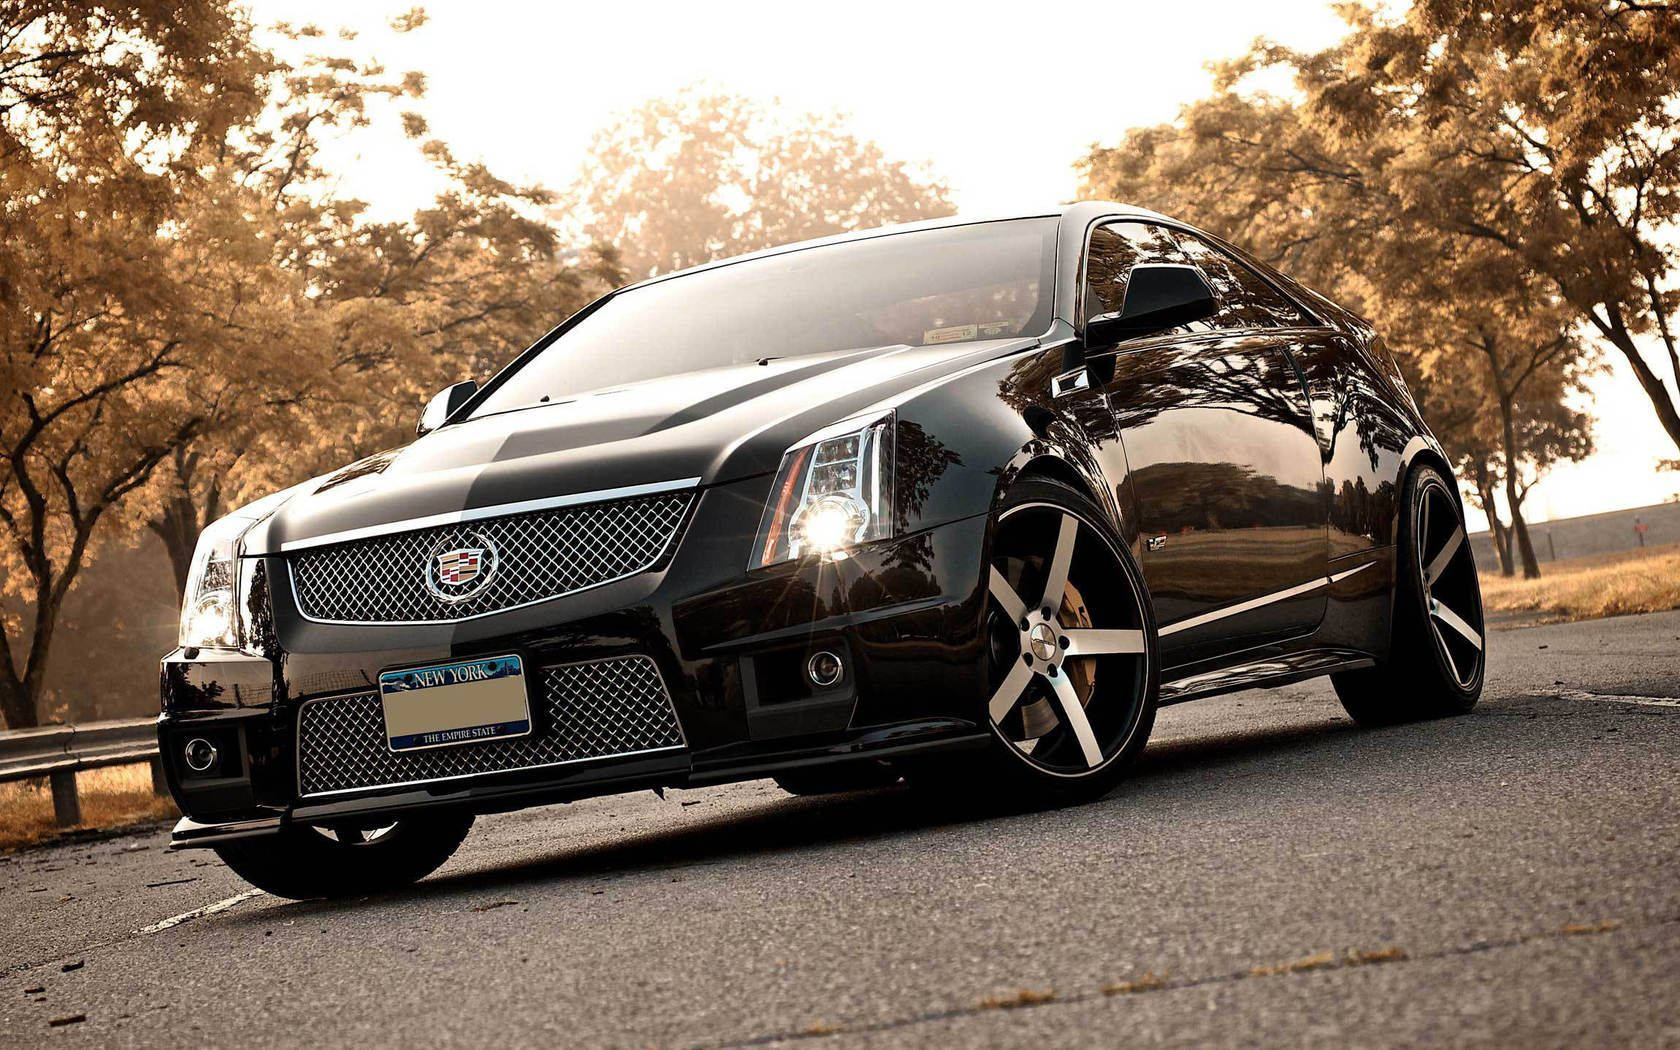 Black Cadillac Coupe Outdoors Wallpaper